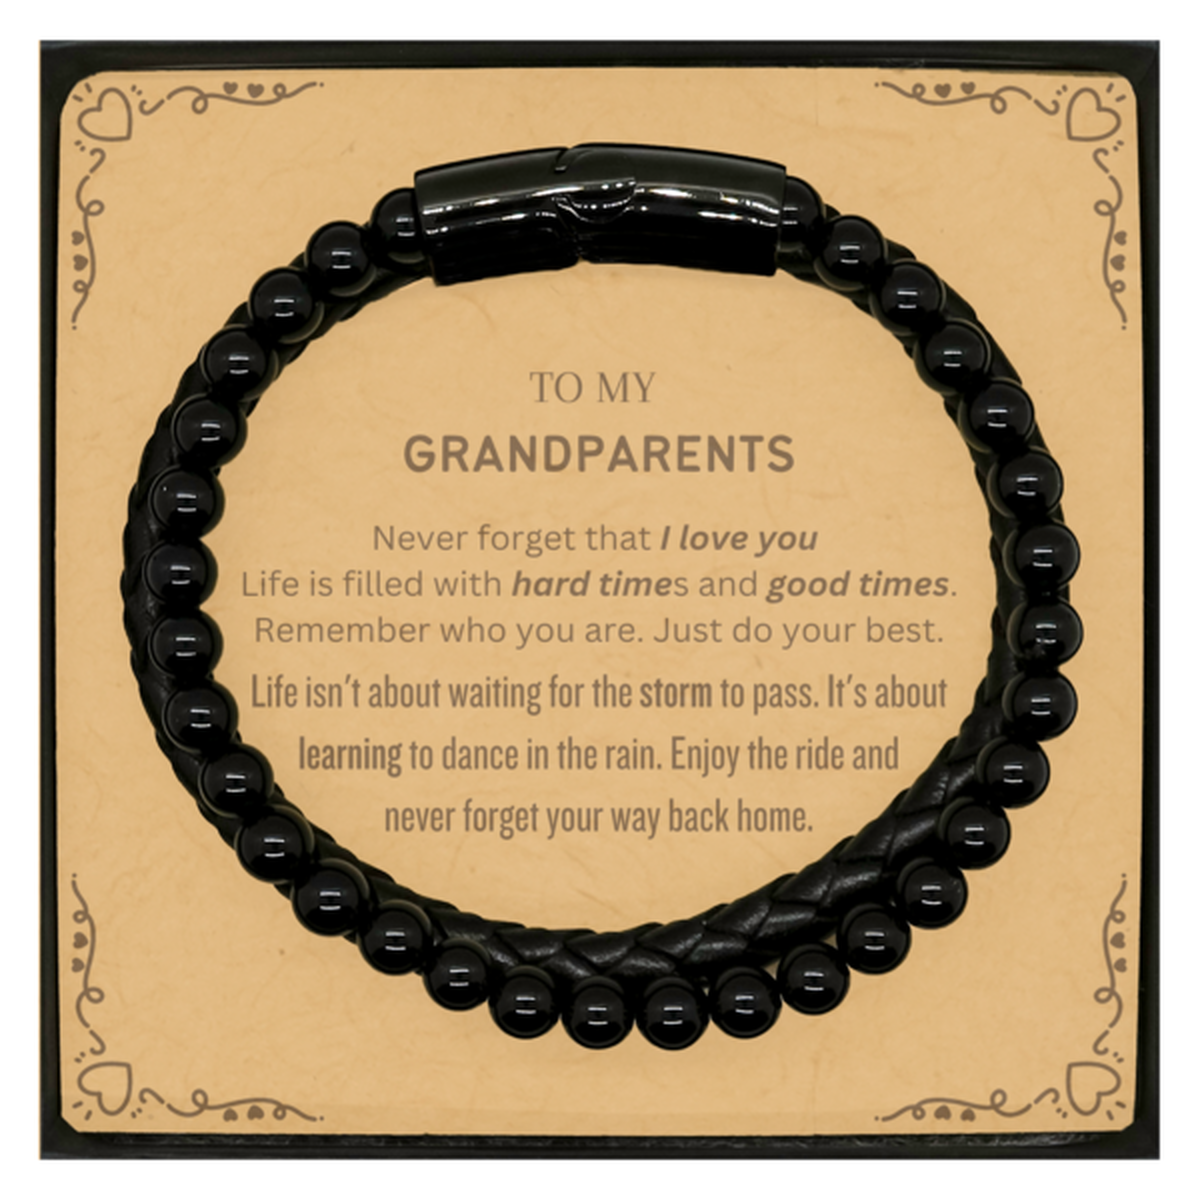 Christmas Grandparents Stone Leather Bracelets Gifts, To My Grandparents Birthday Thank You Gifts For Grandparents, Graduation Unique Gifts For Grandparents To My Grandparents Never forget that I love you life is filled with hard times and good times. Rem